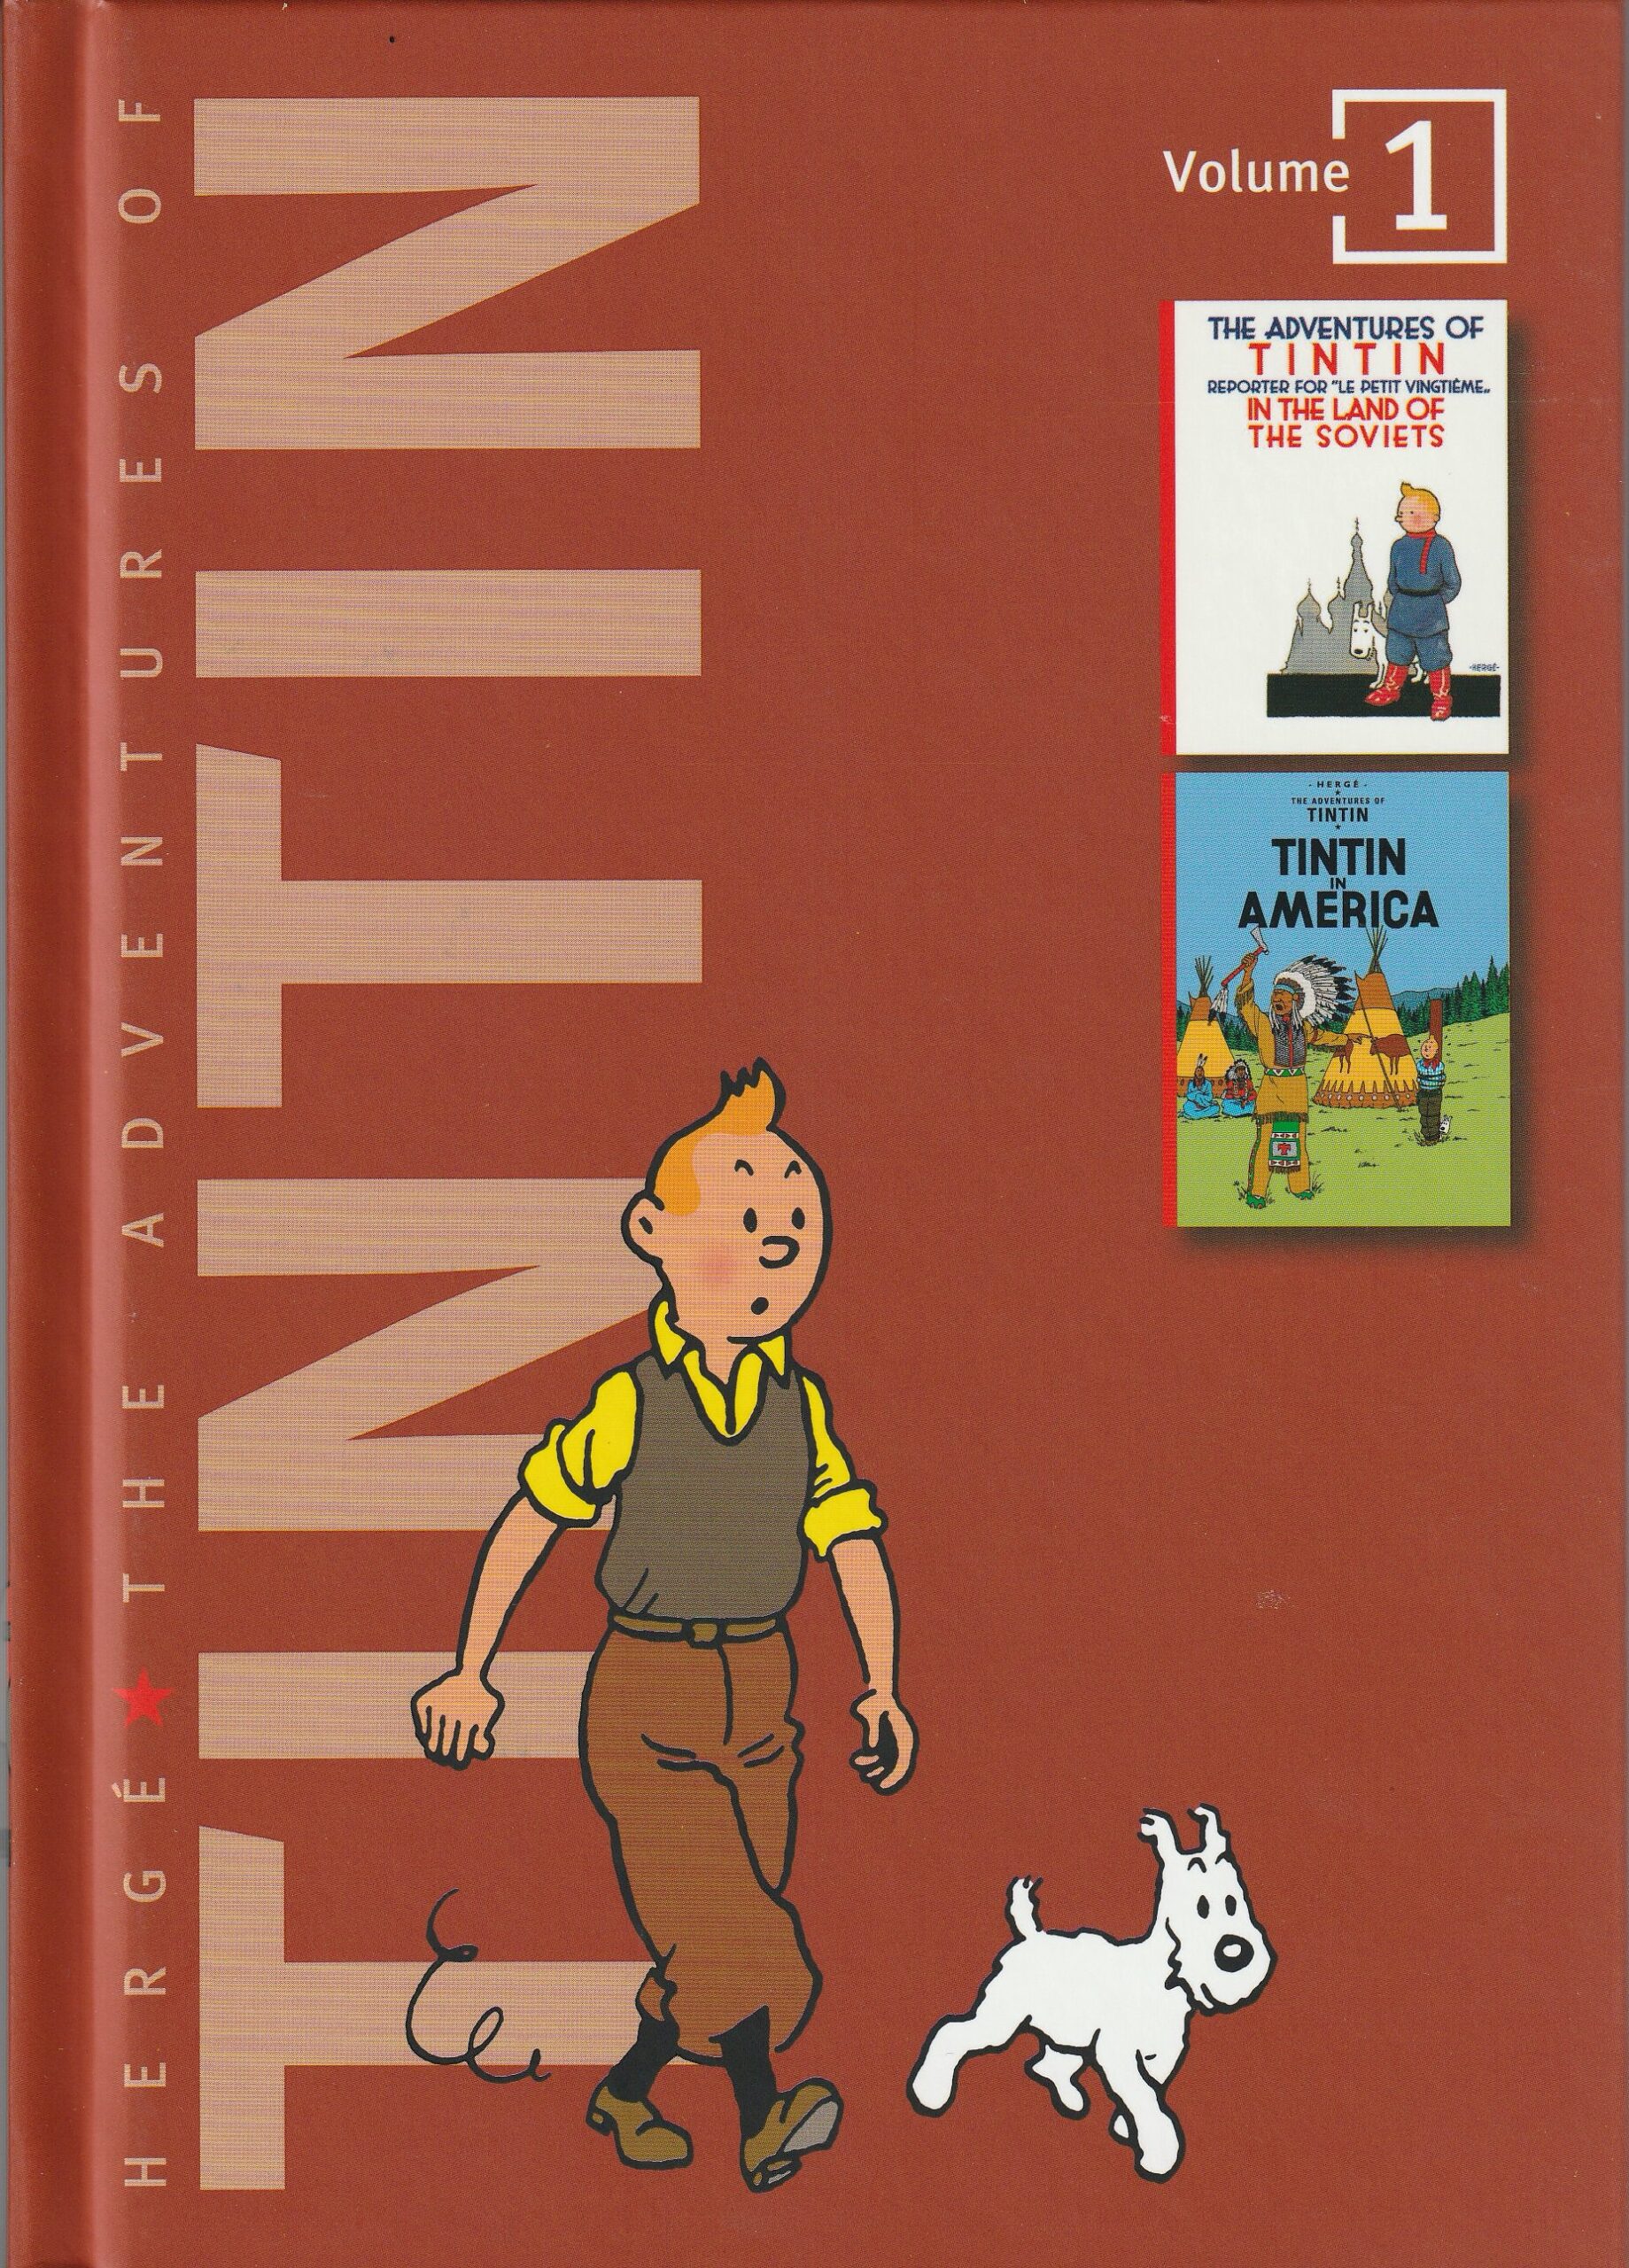 The Adventures of Tintin Volume 1 by Hergé